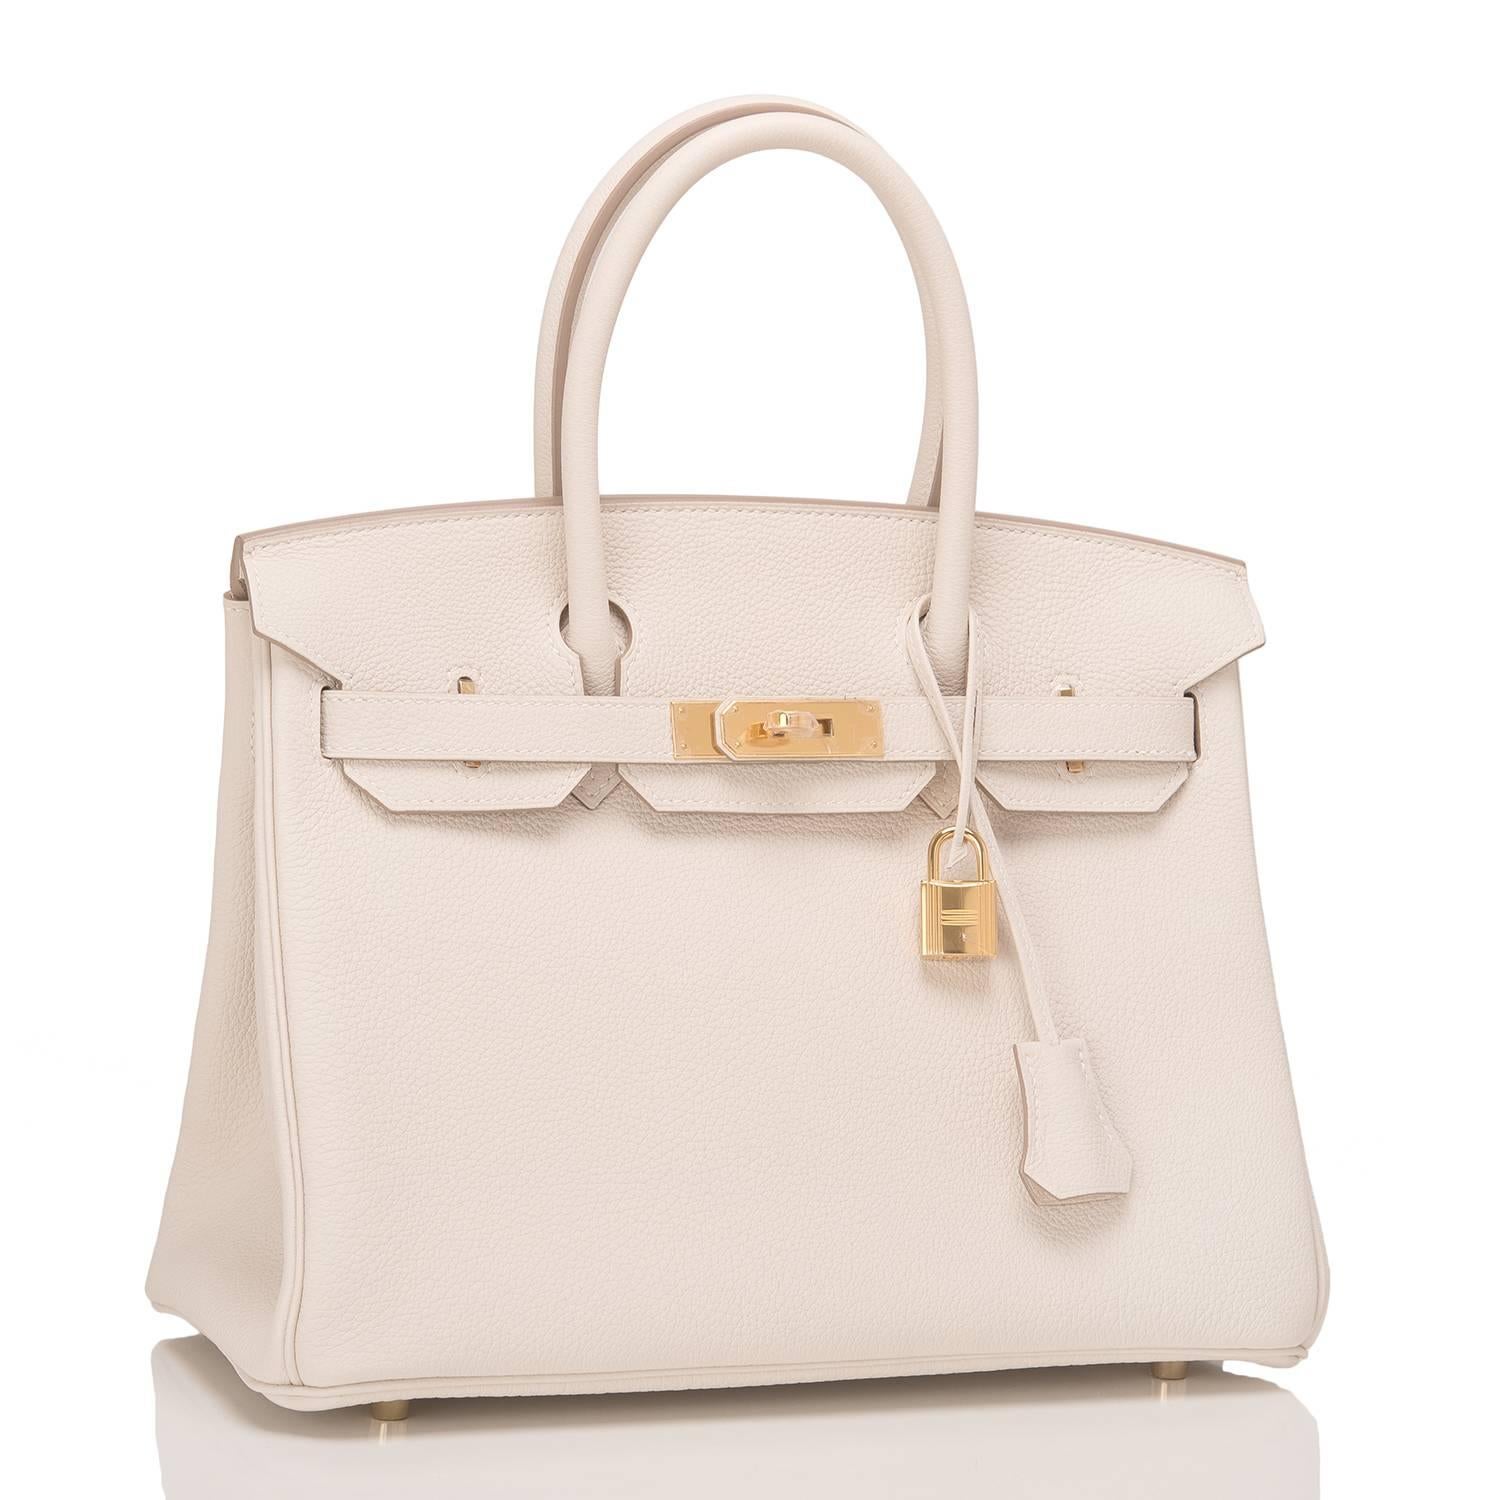 Hermes Craie Birkin 30cm of togo leather with gold hardware.

This Birkin features tonal stitching, a front toggle closure, a clochette with lock and two keys, and double rolled handles.

The interior is lined with Craie chevre and has one zip